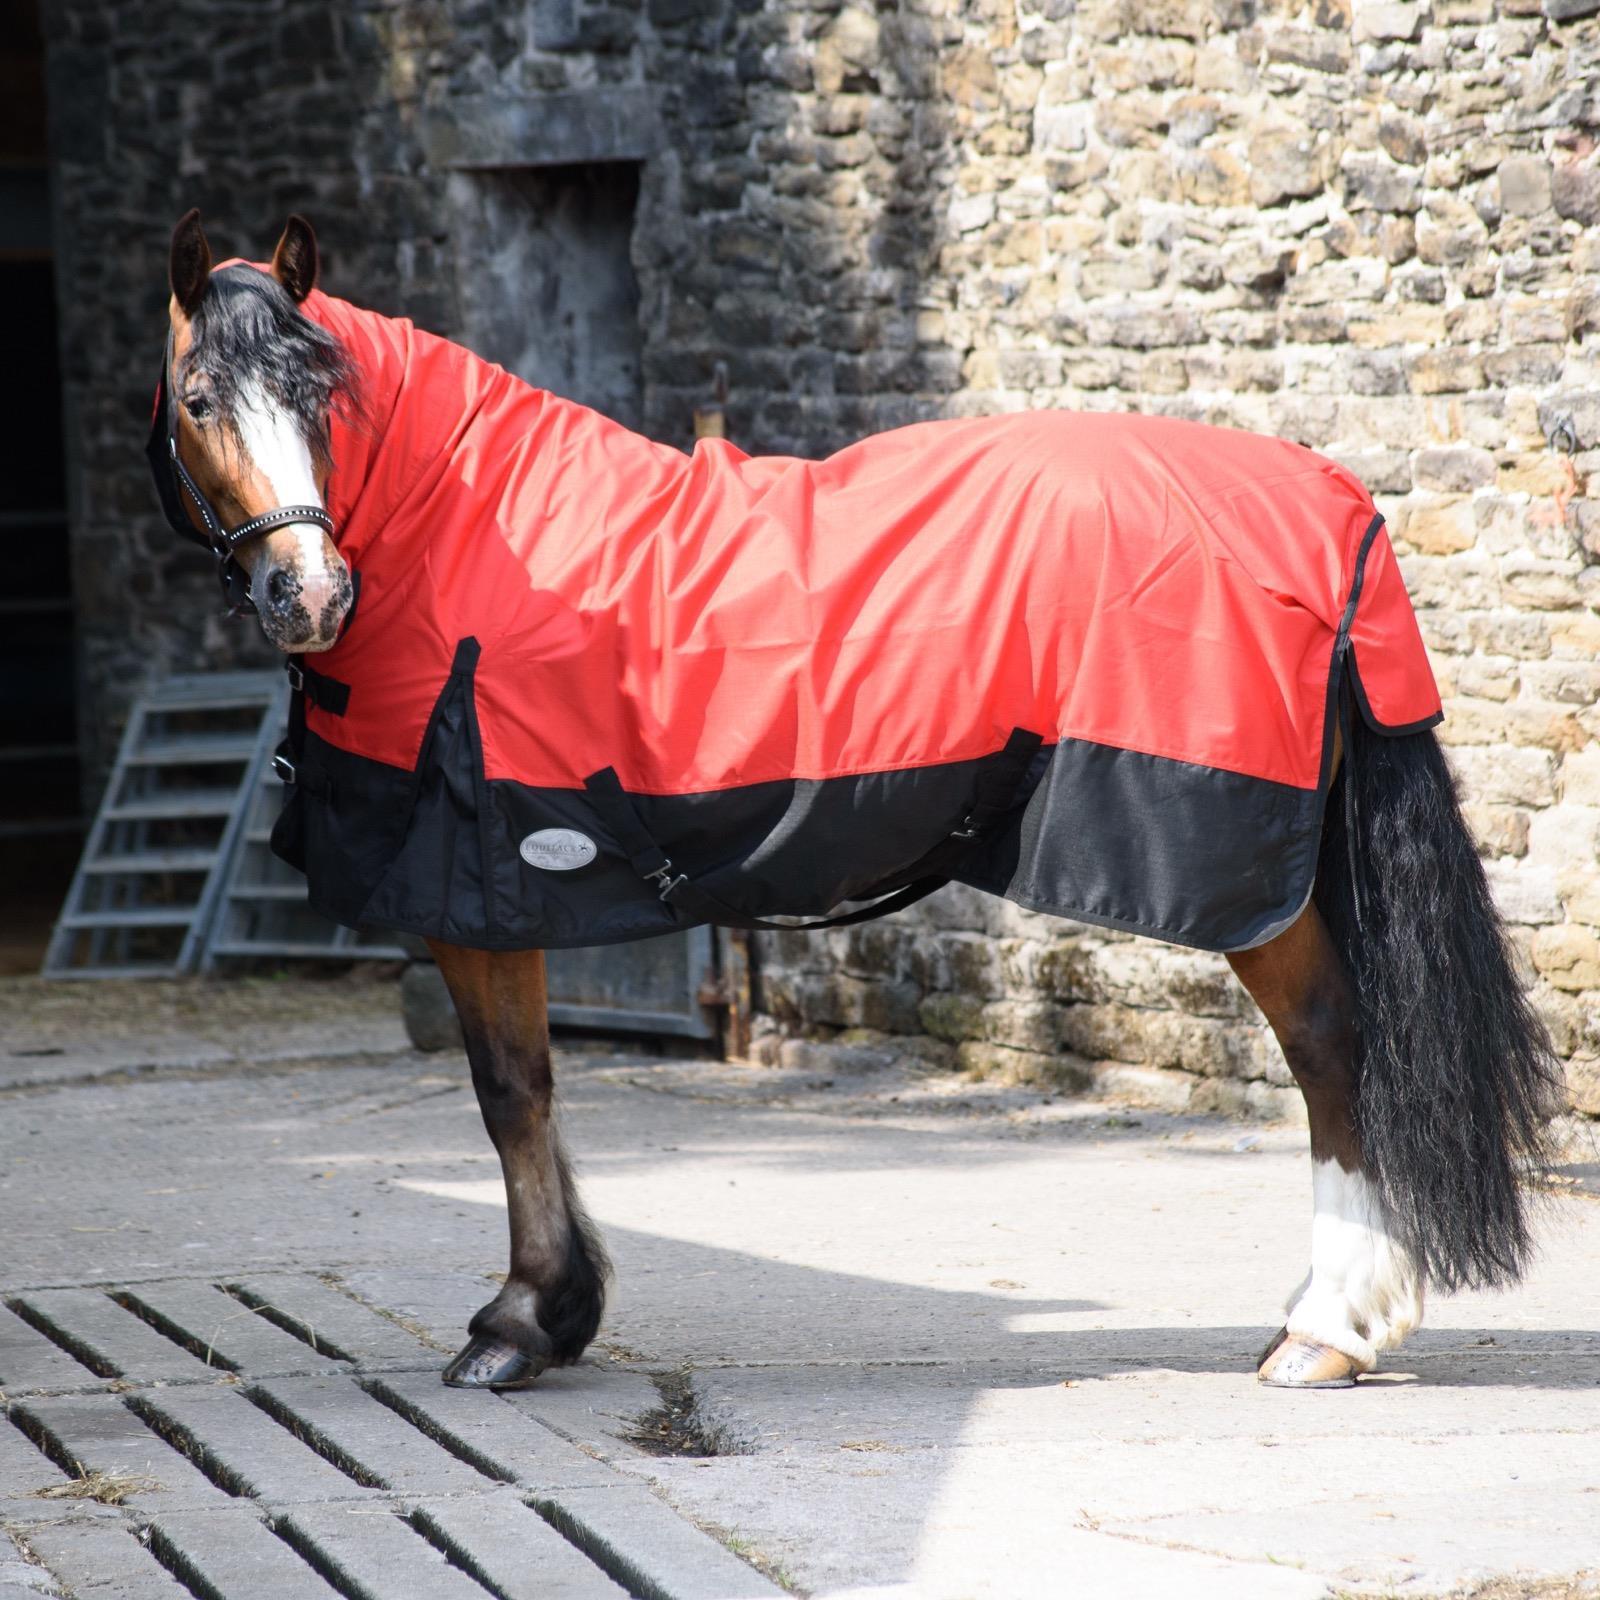 600D Outdoor Winter Turnout Horse Rugs 50G Fill COMBO Full Neck Red/Black 5'3-6'9 - Tack24